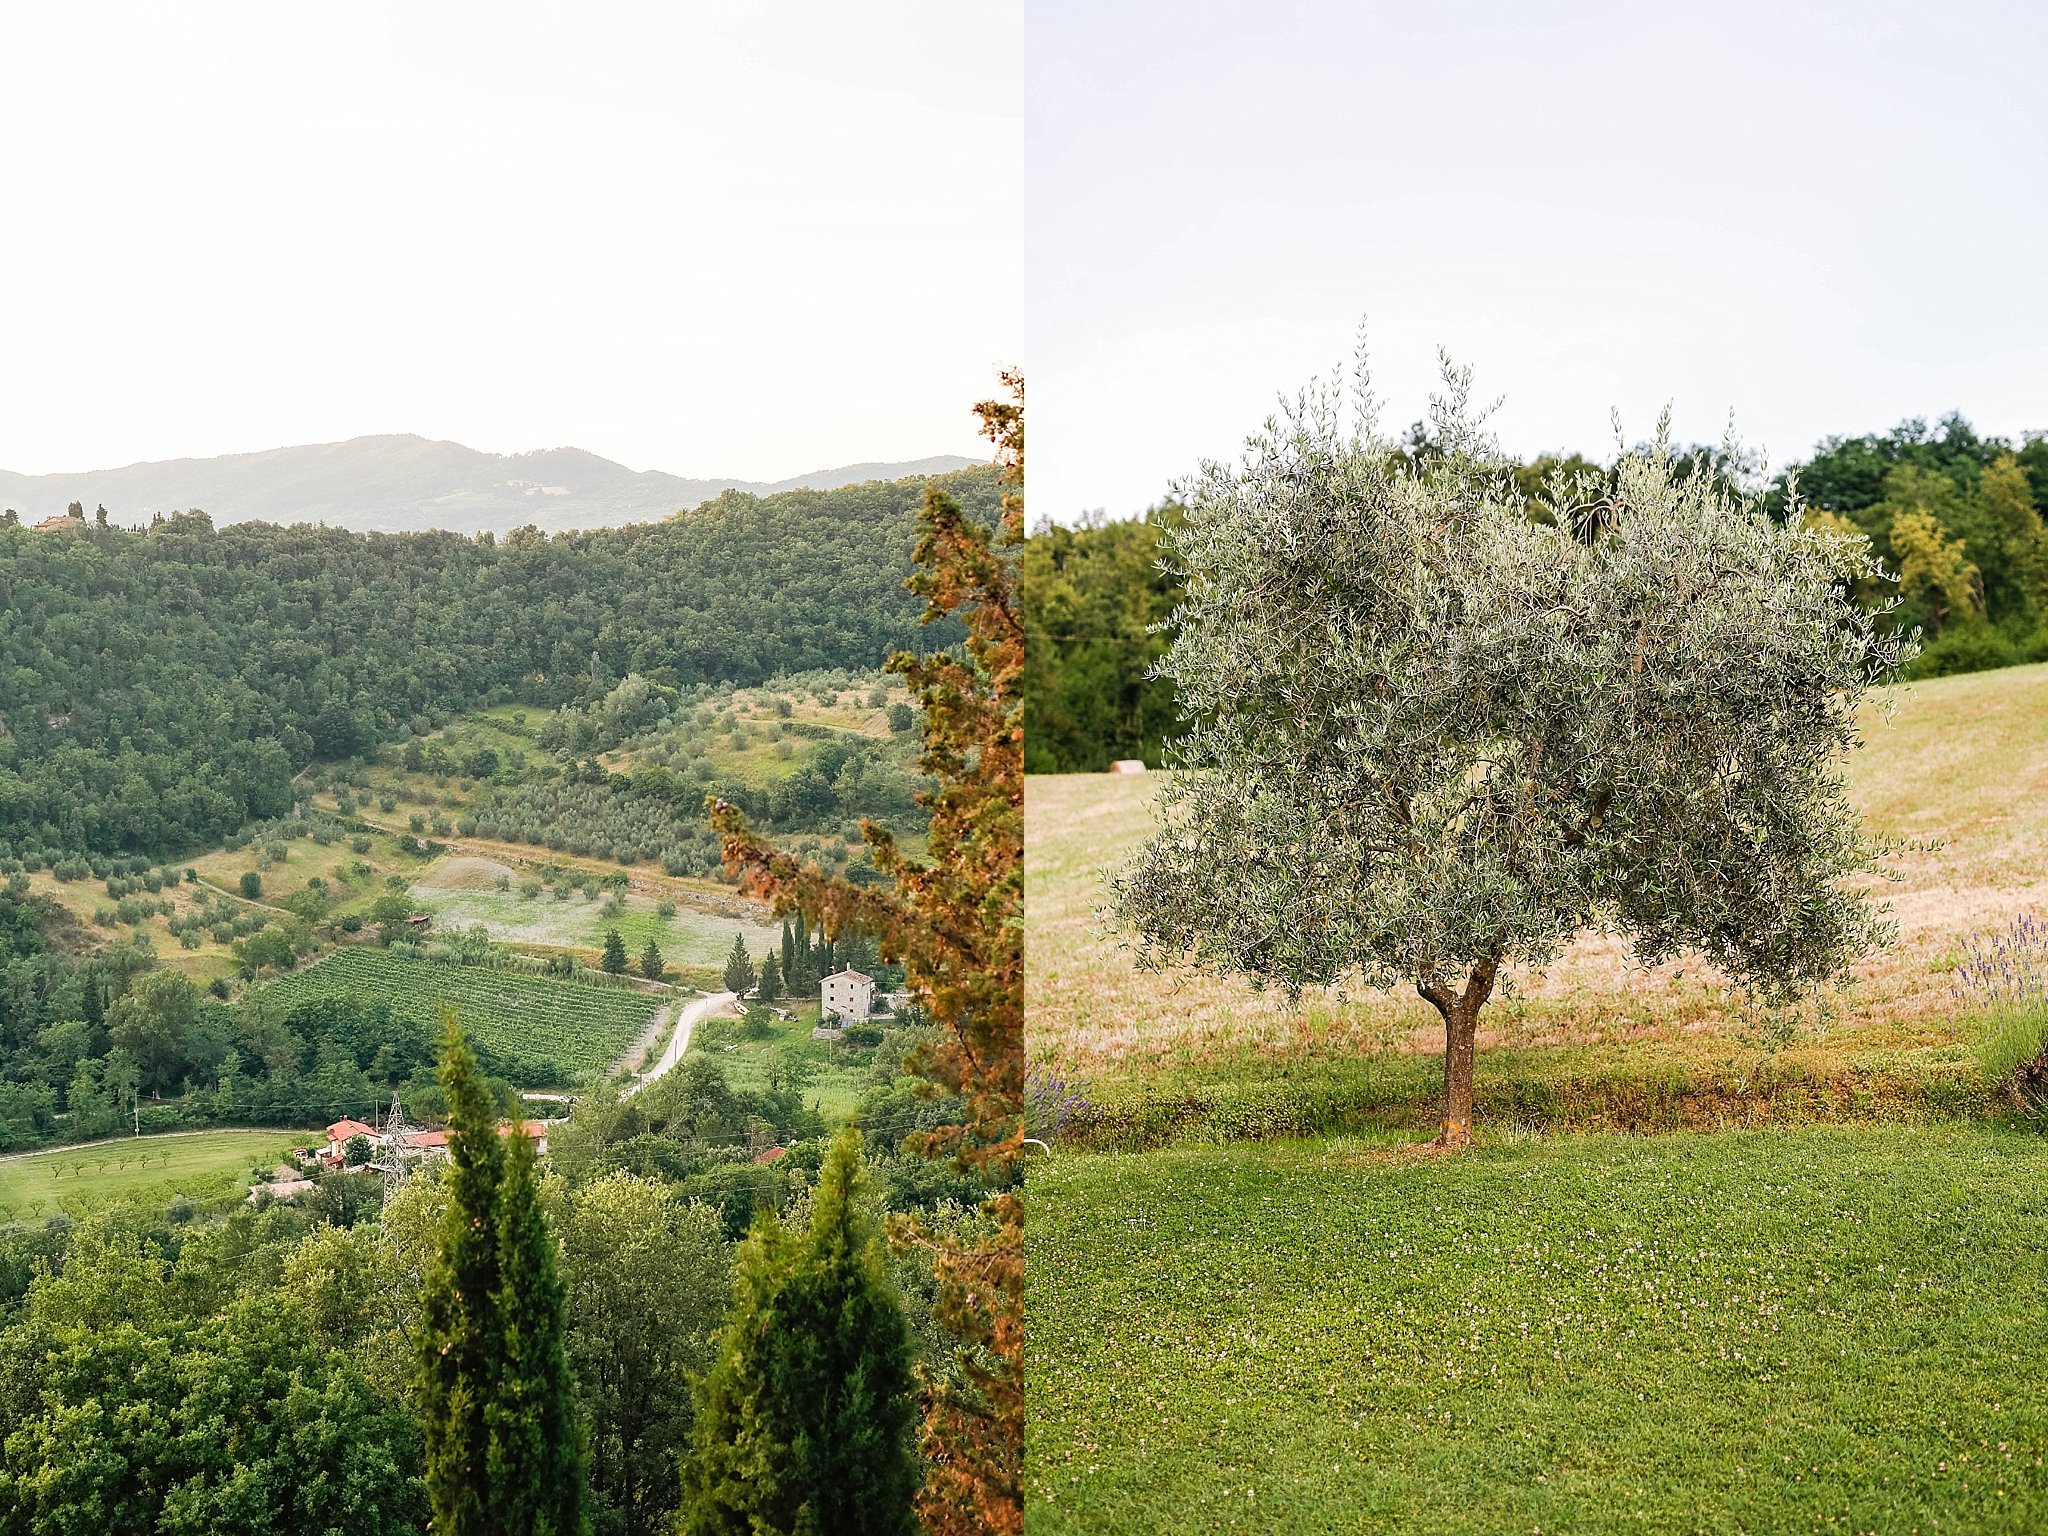 kristen_dyer_photography_italy_homeaway (25 of 28).jpg